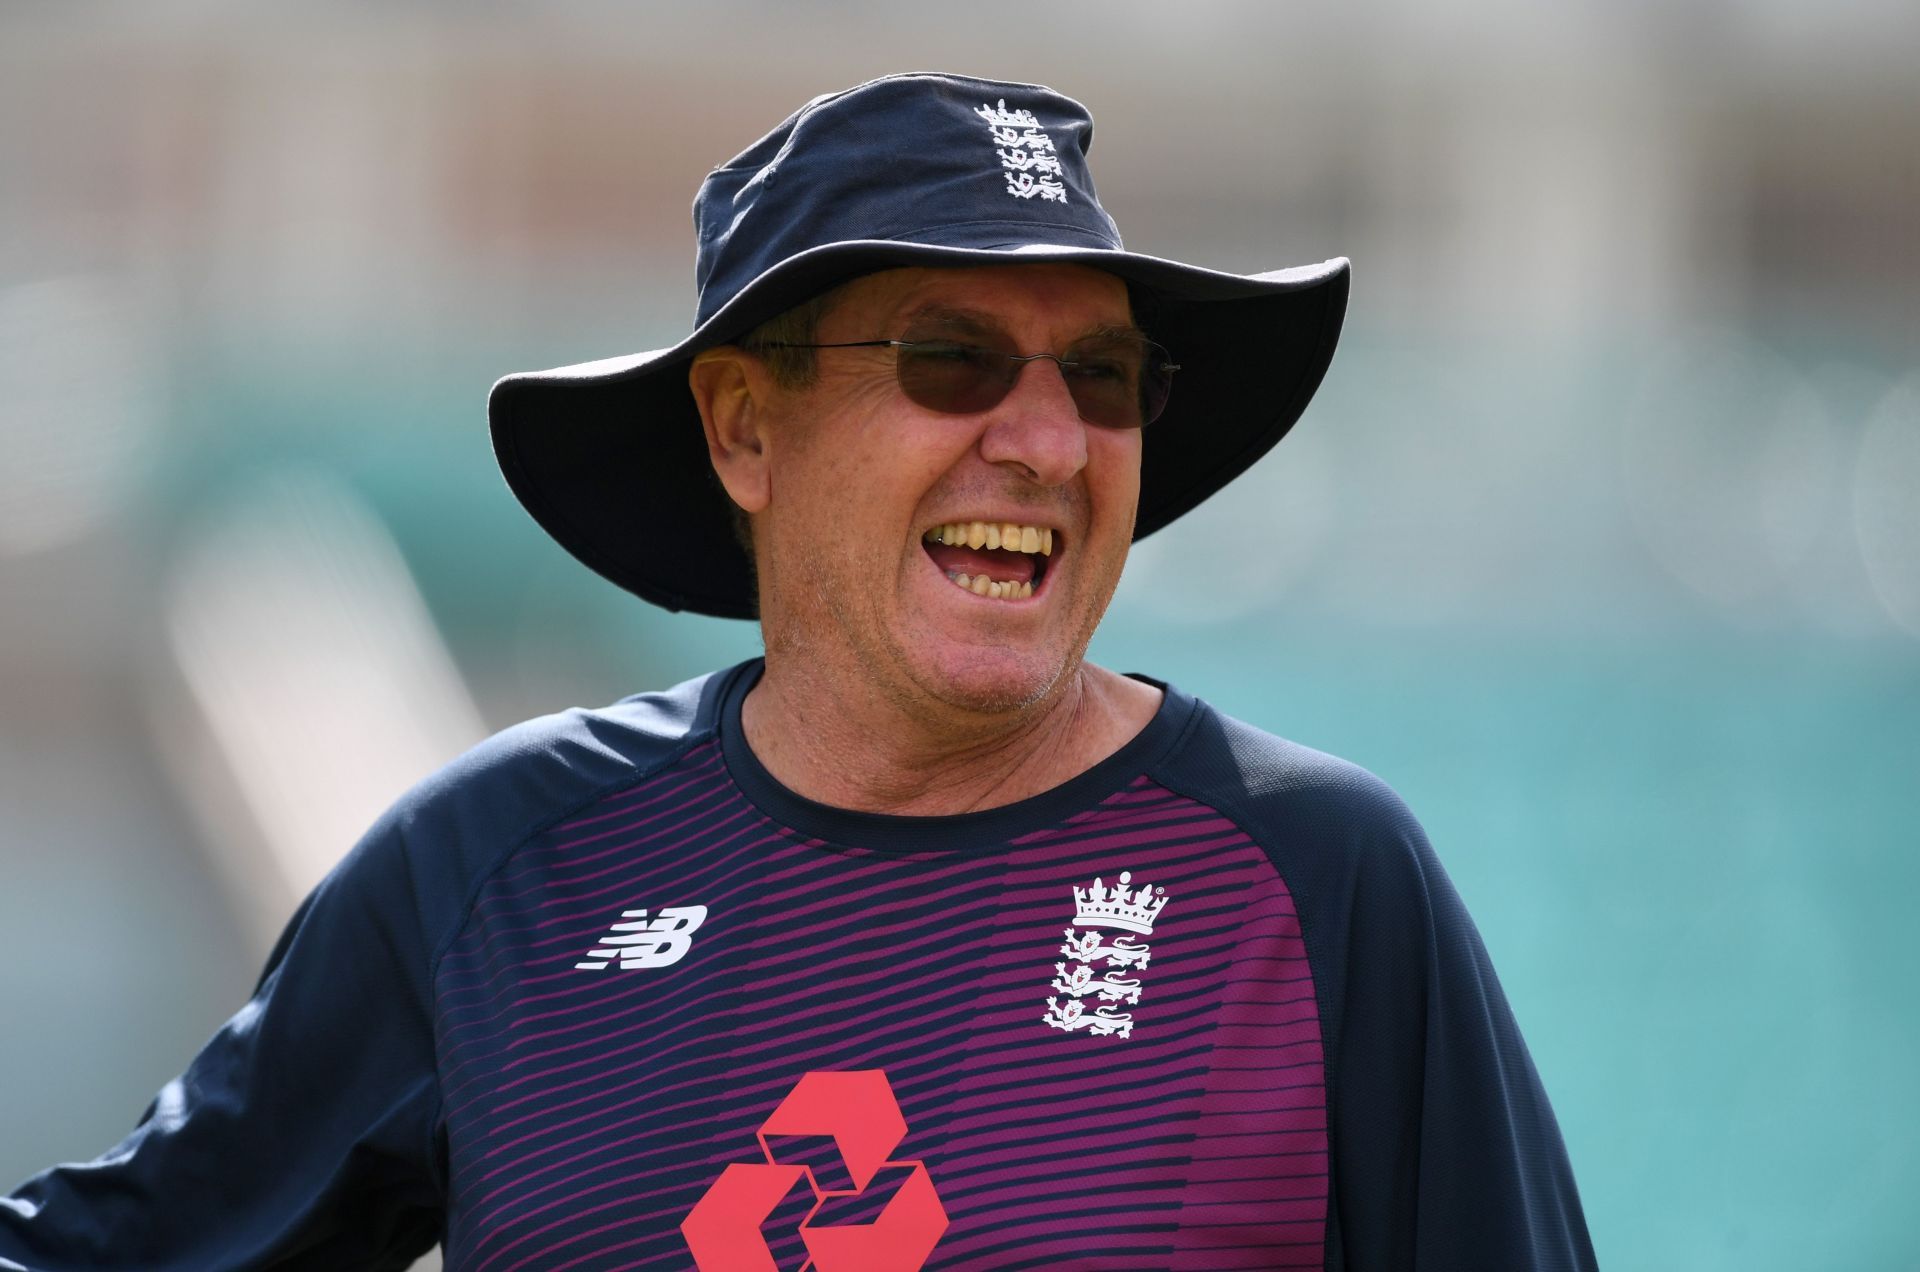 Trevor Bayliss brings a wealth of experience to the struggling IPL team